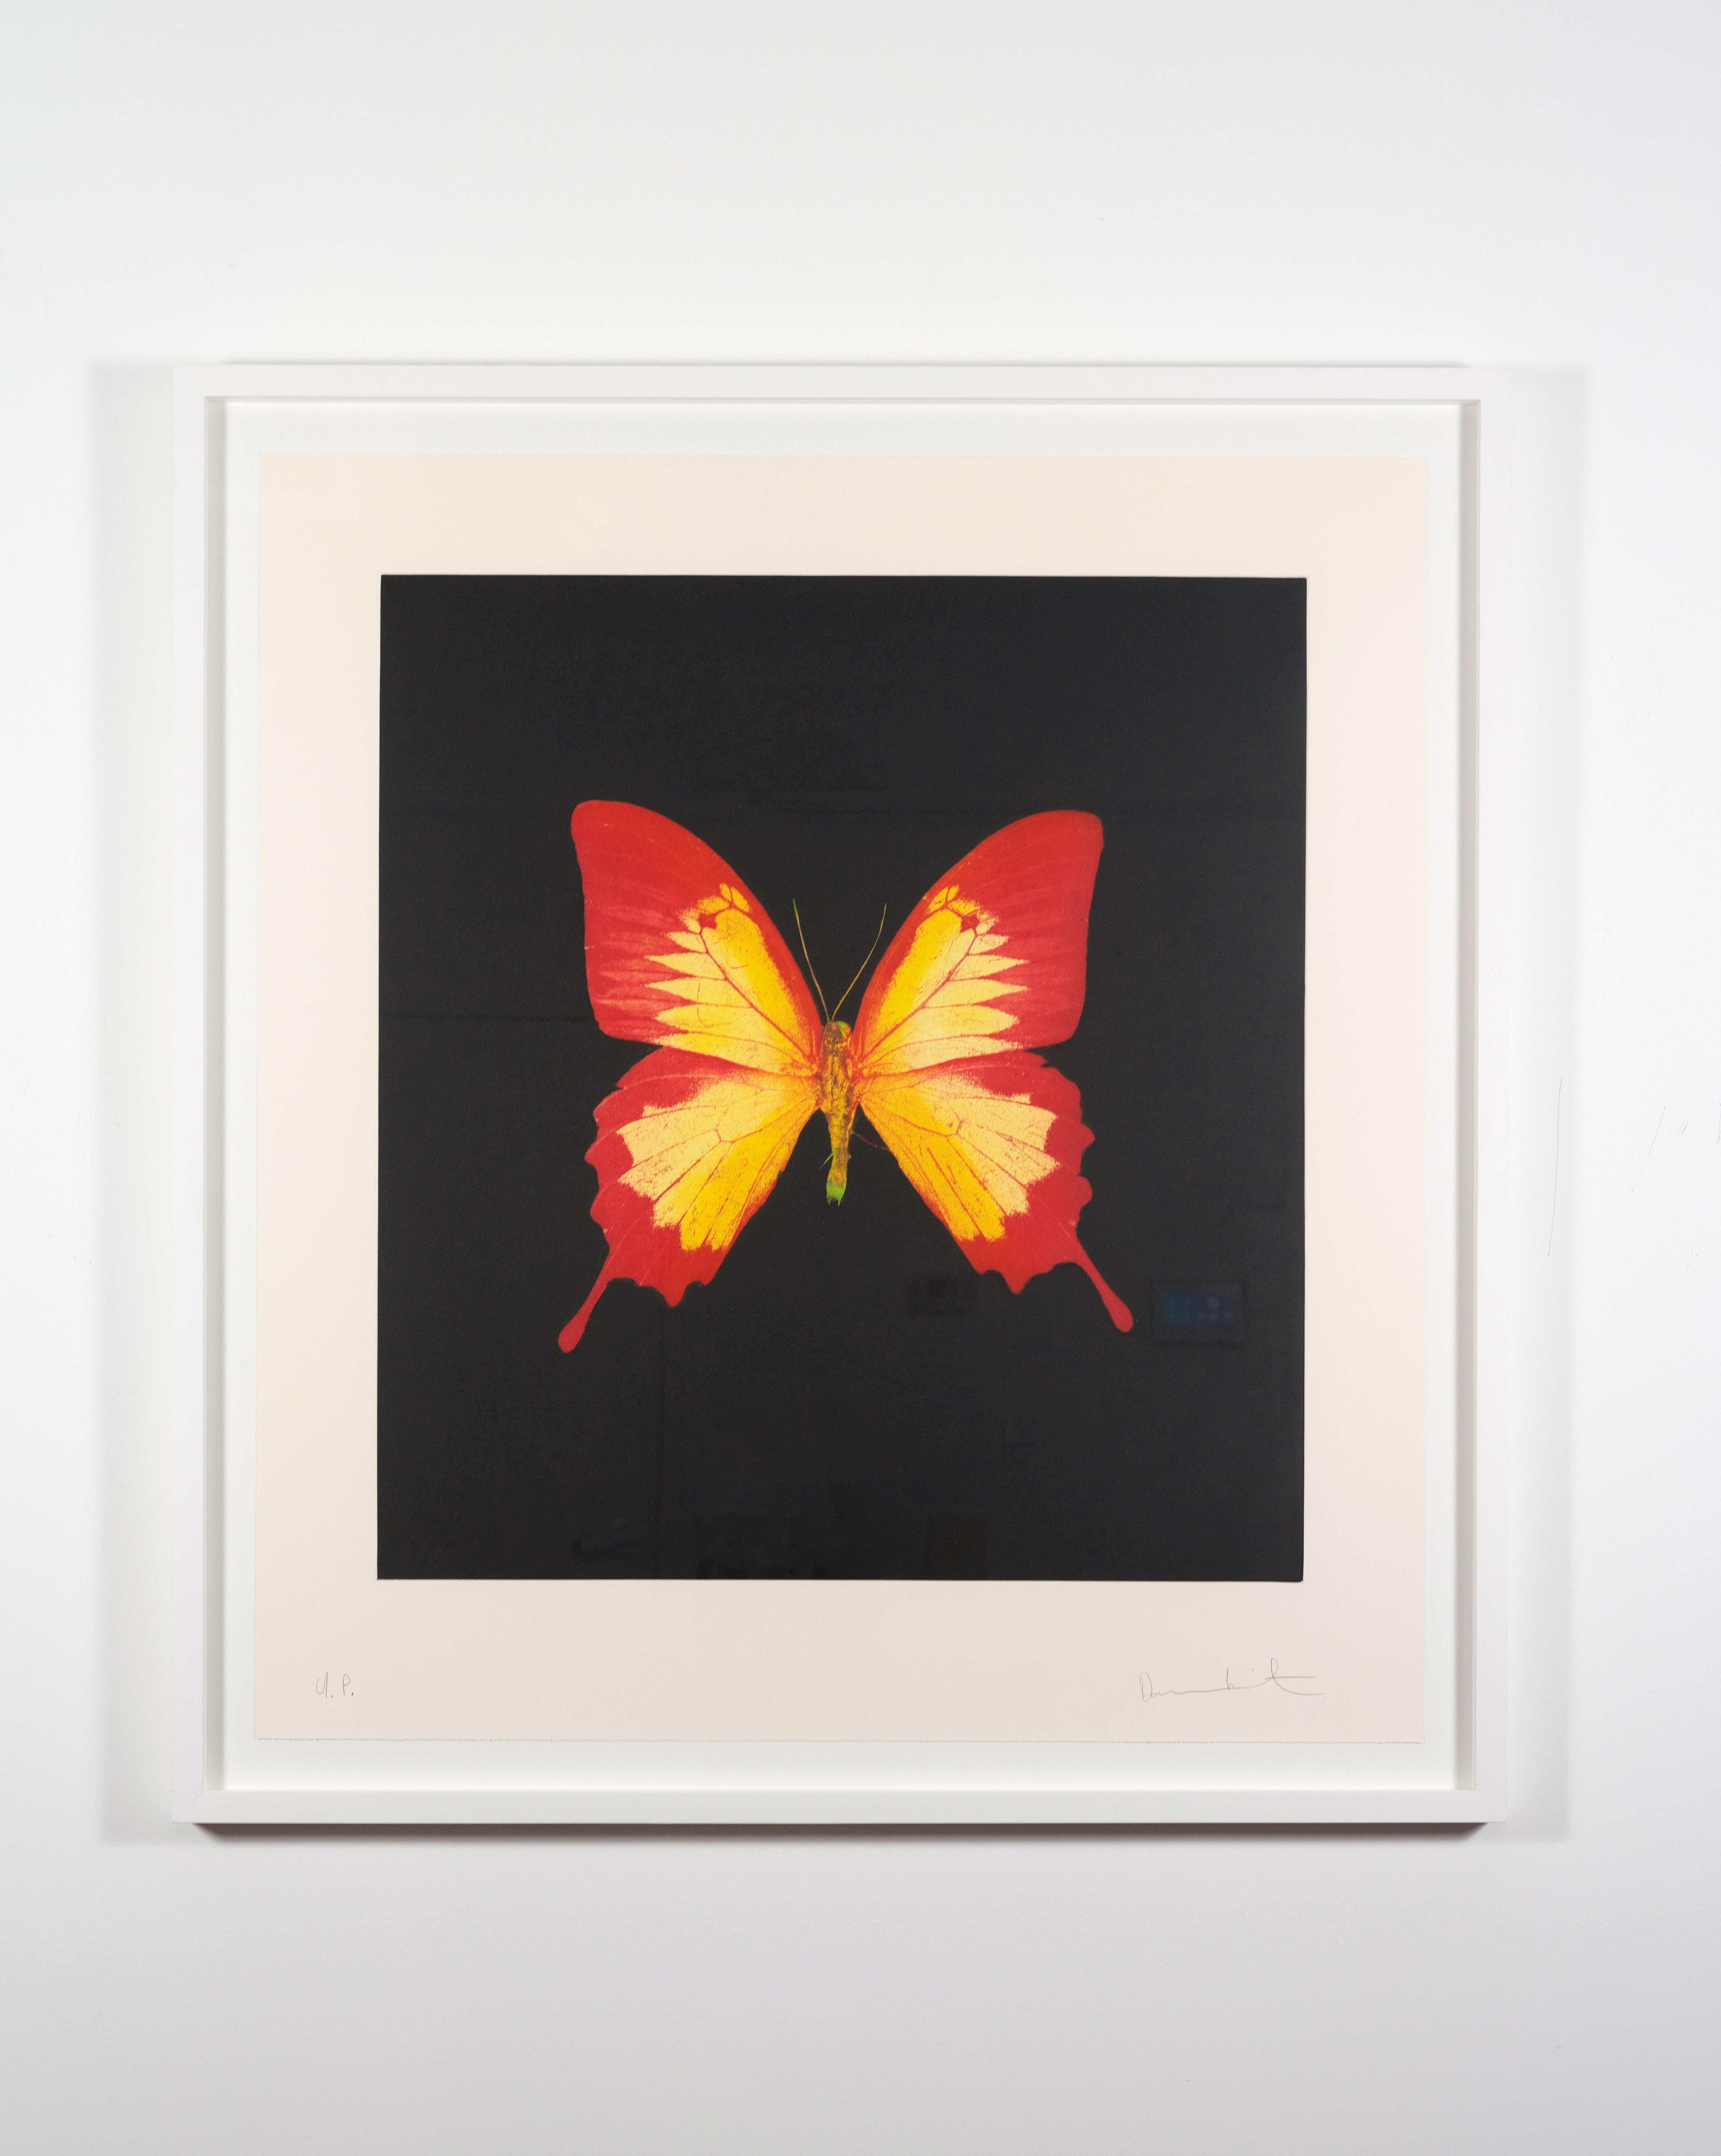 The Souls on Jacob’s Ladder Take Their Flight (U.P.) - Contemporary Print by Damien Hirst